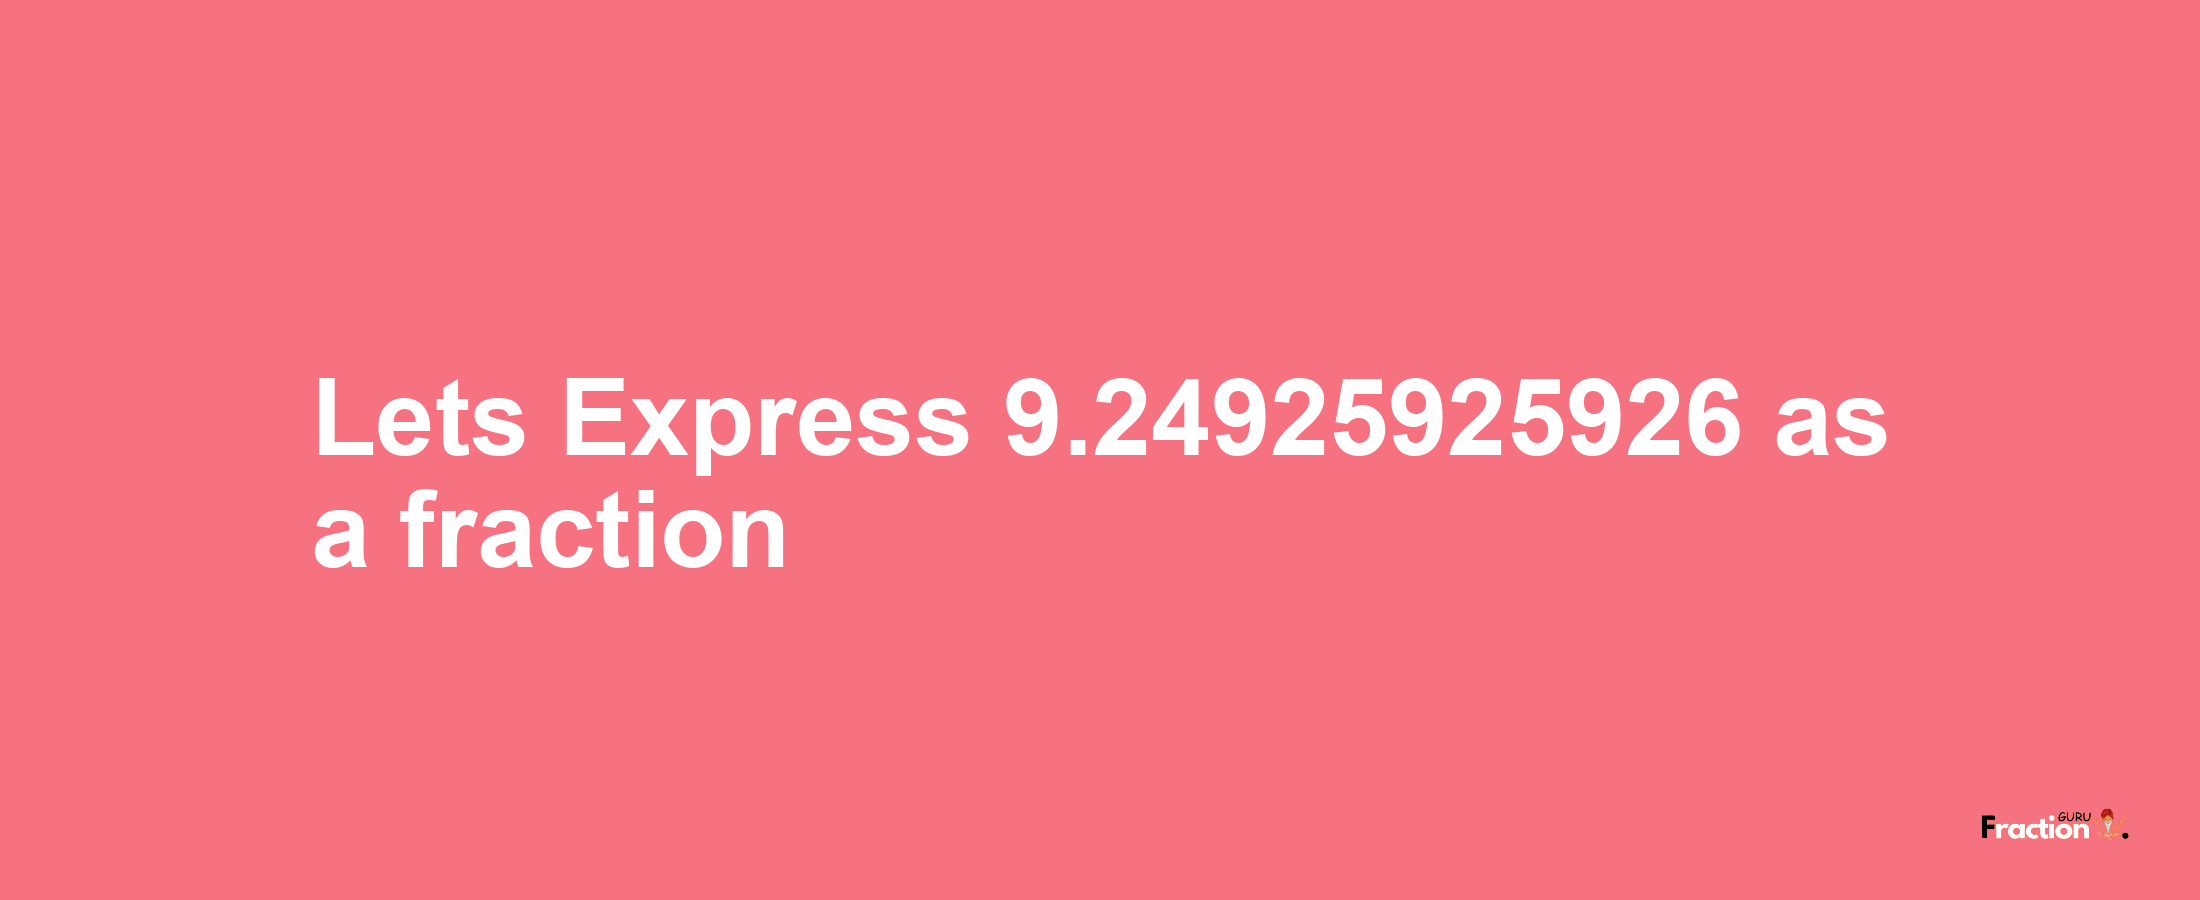 Lets Express 9.24925925926 as afraction